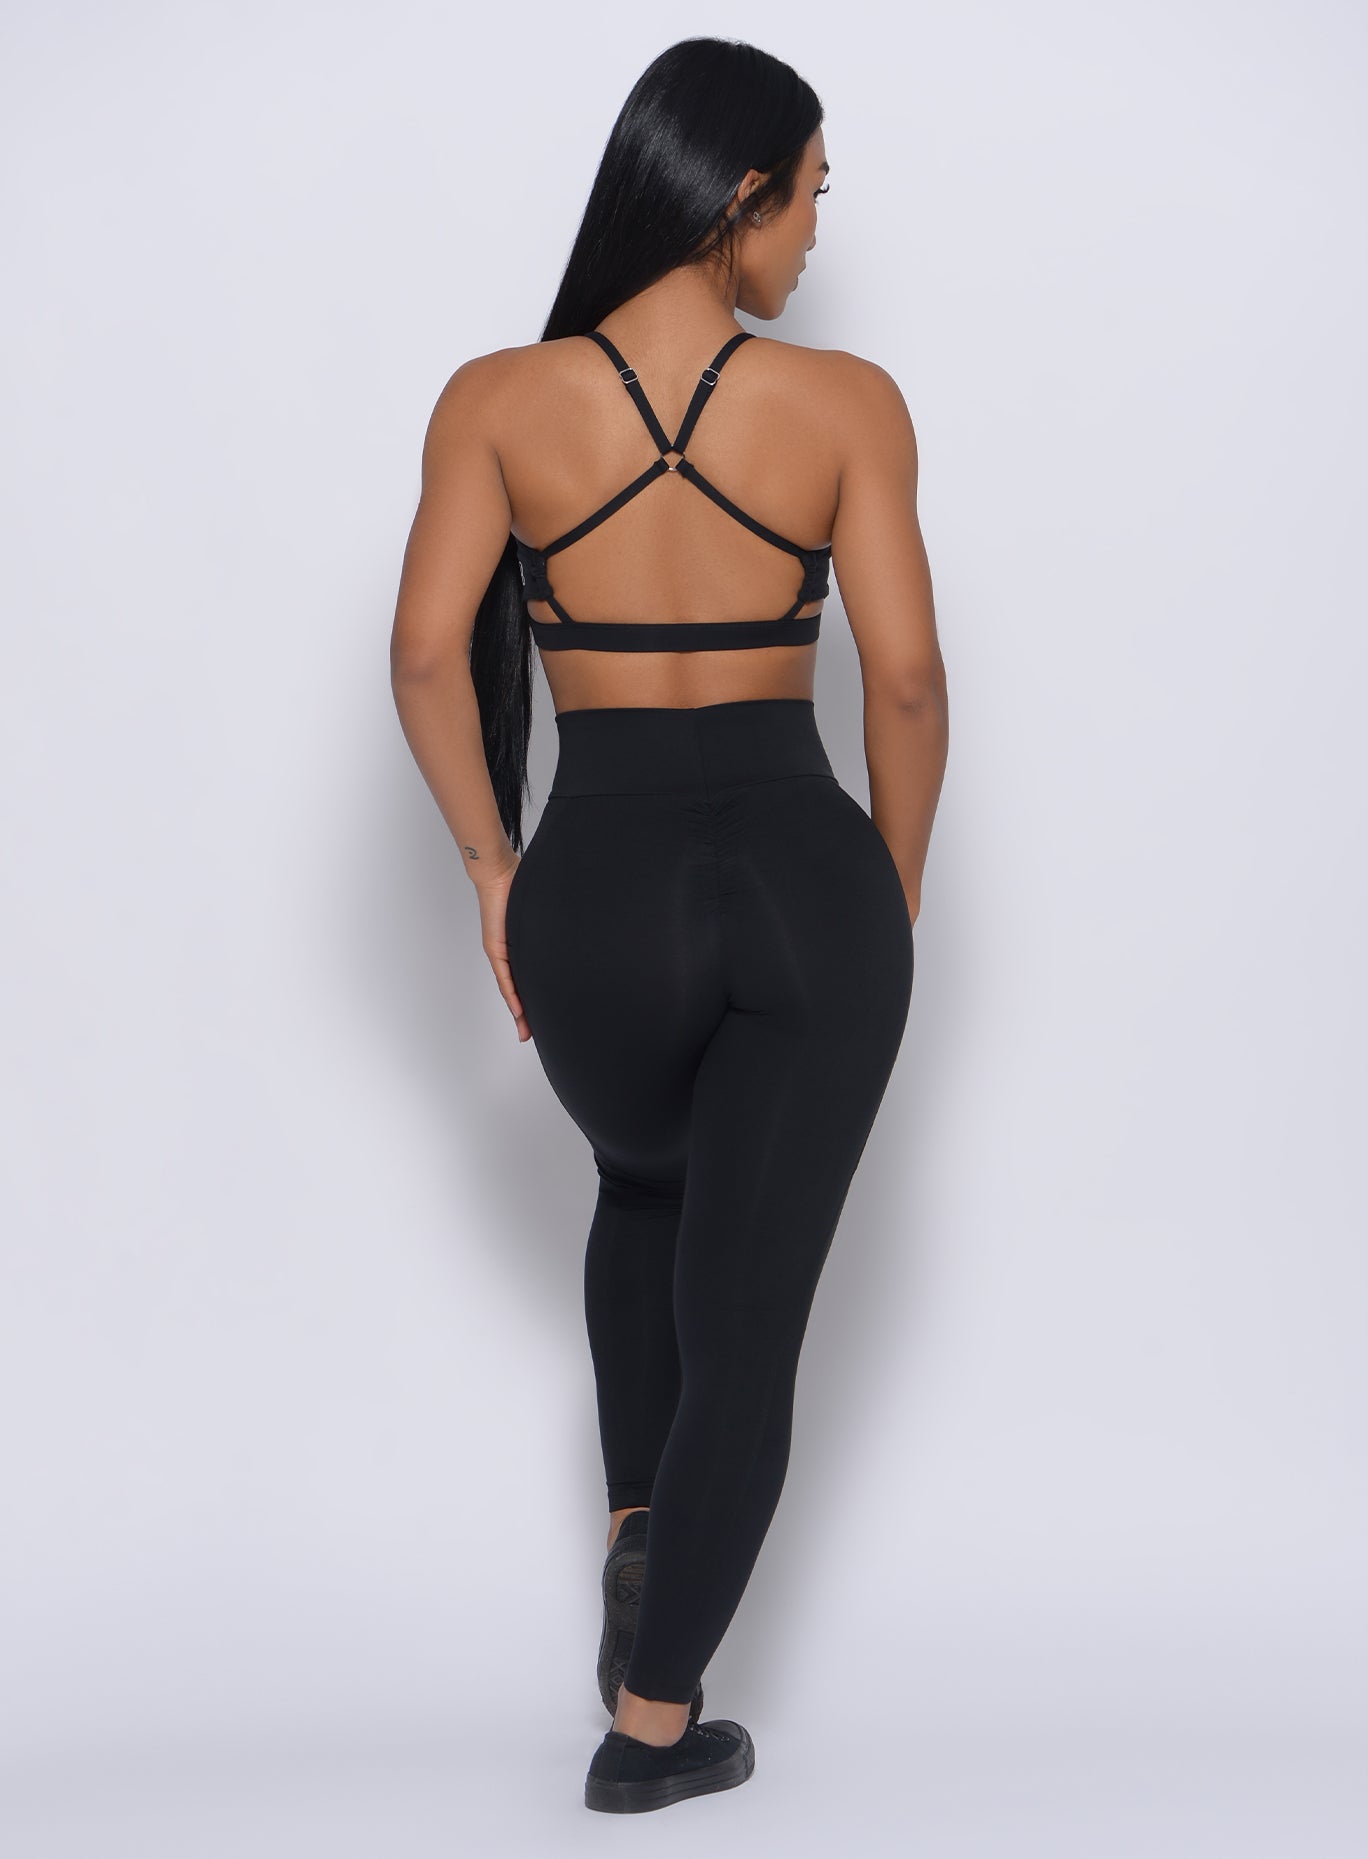 Back profile view of a model wearing our black pumped sports bra and a matching leggings